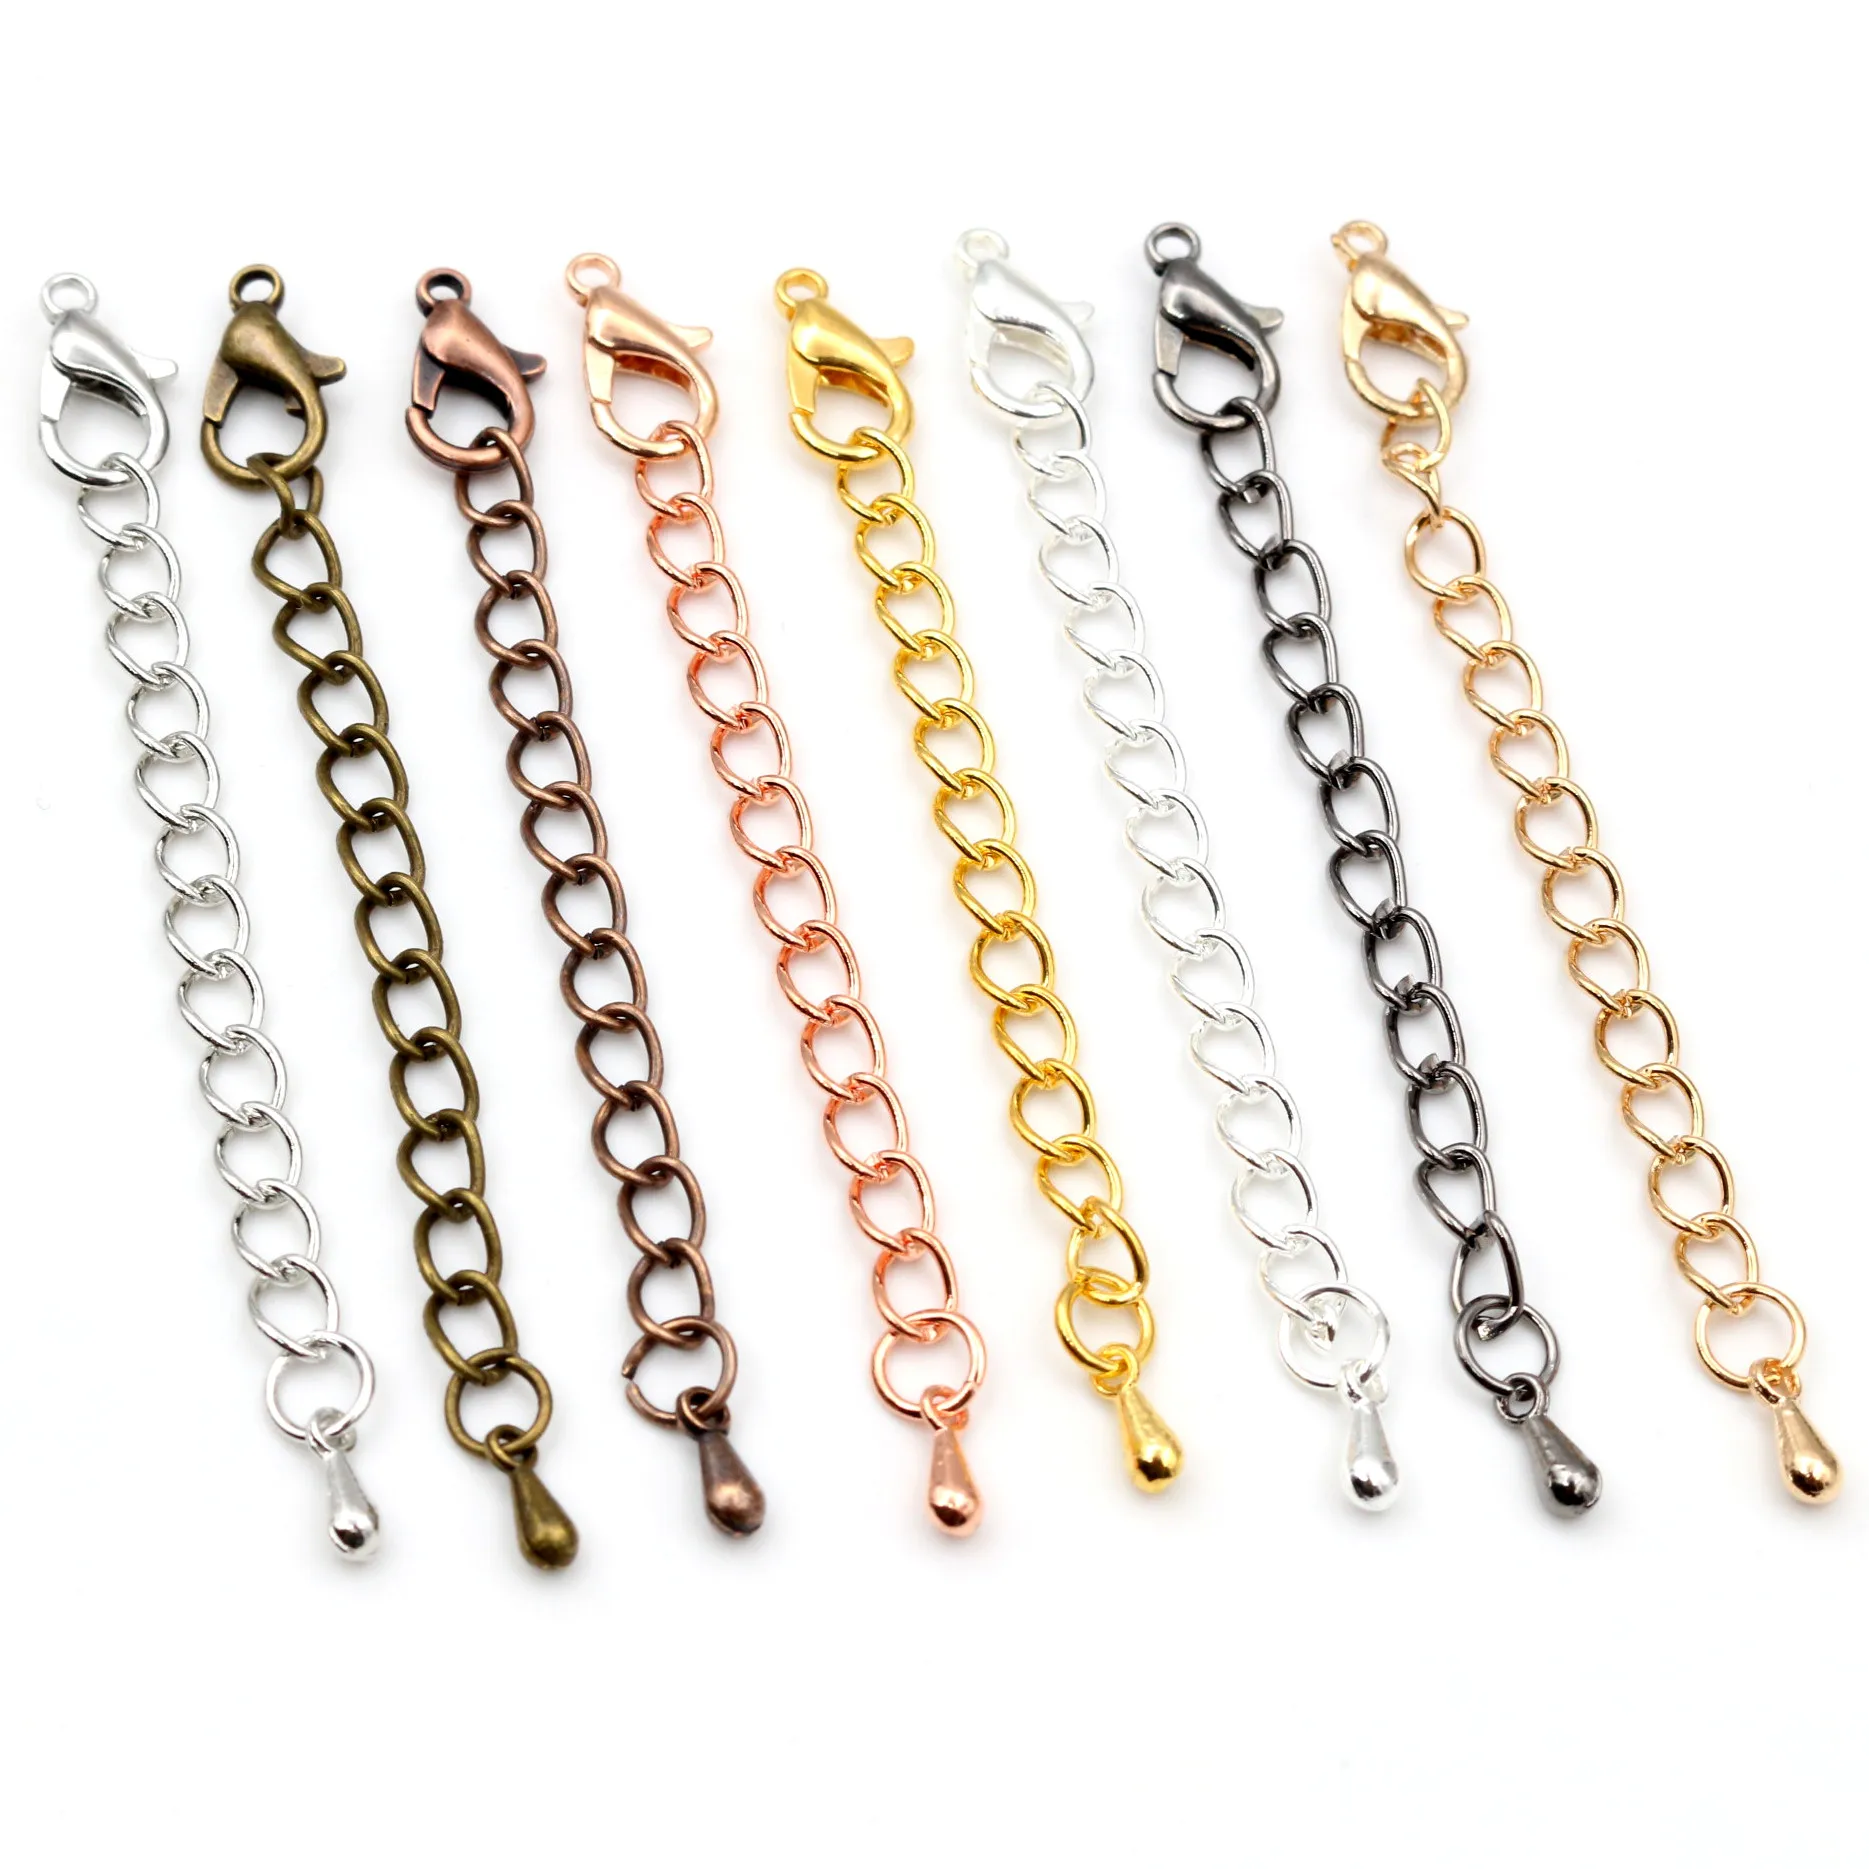 

10pcs/lot 50/70mm Tone Extended Extension Tail Chain Lobster Clasps Connector For DIY Jewelry Making Findings Bracelet Necklace, Multi-colors